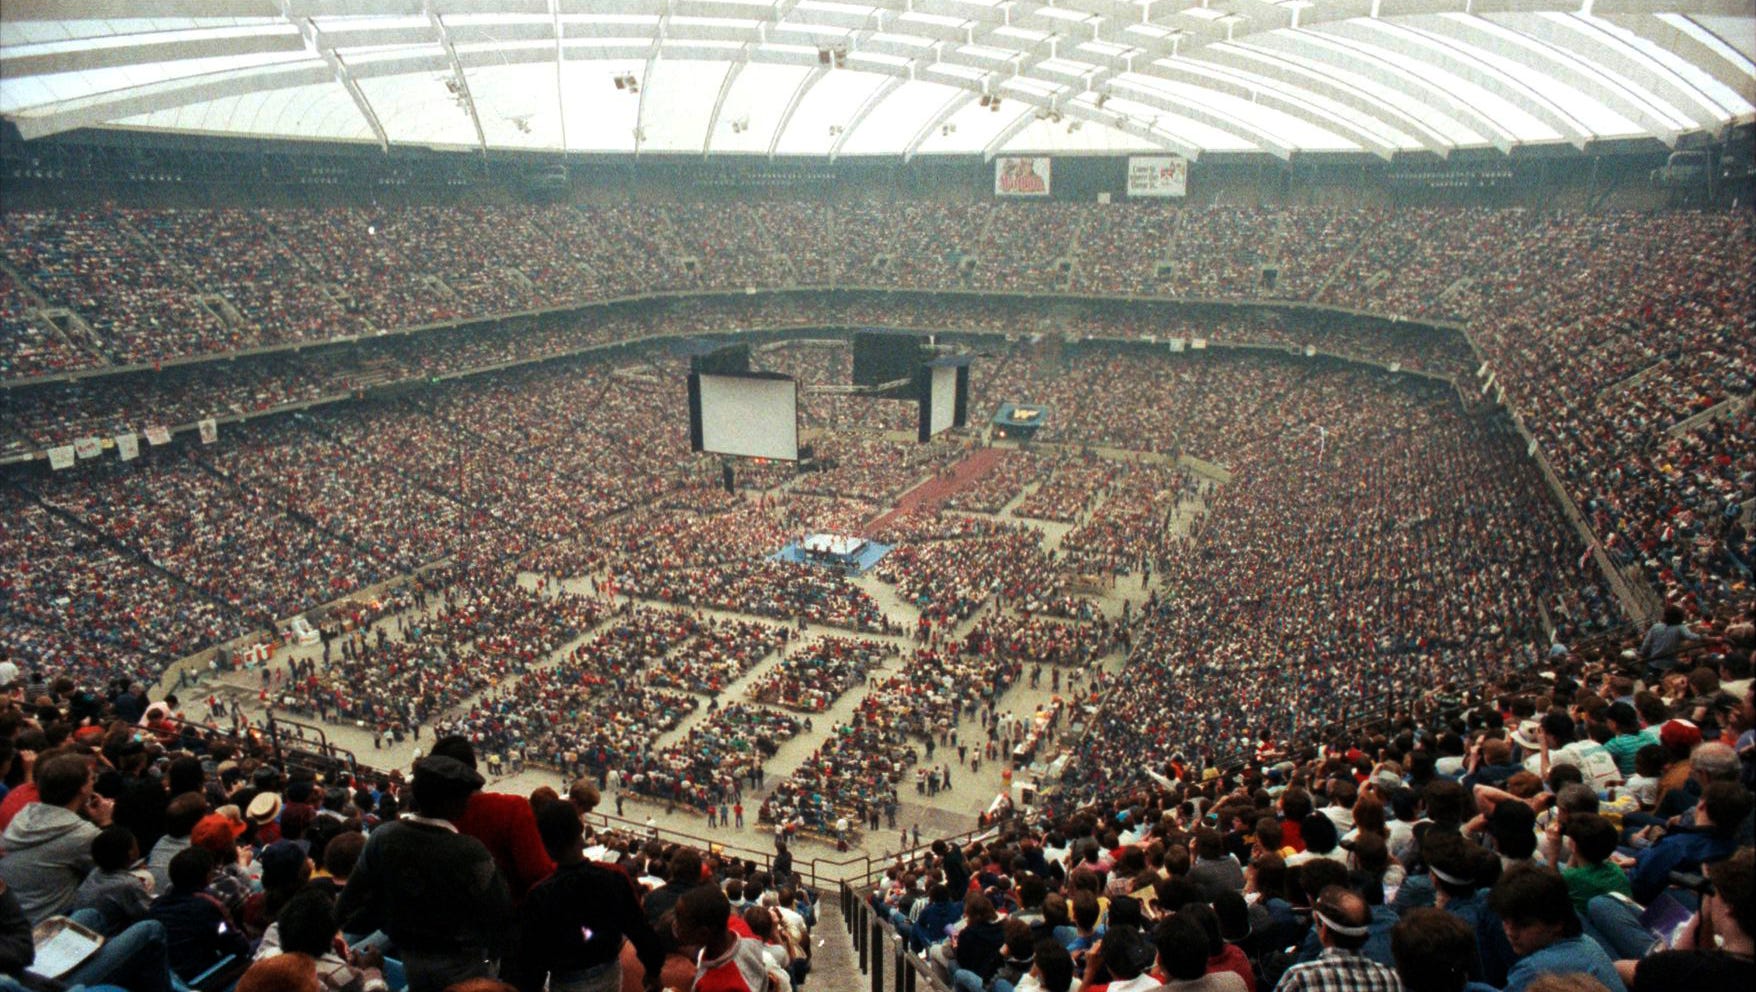 A crowd of more than 90,000 was reported as attending WrestleMania III, though many of the sport's historians dispute that figure.